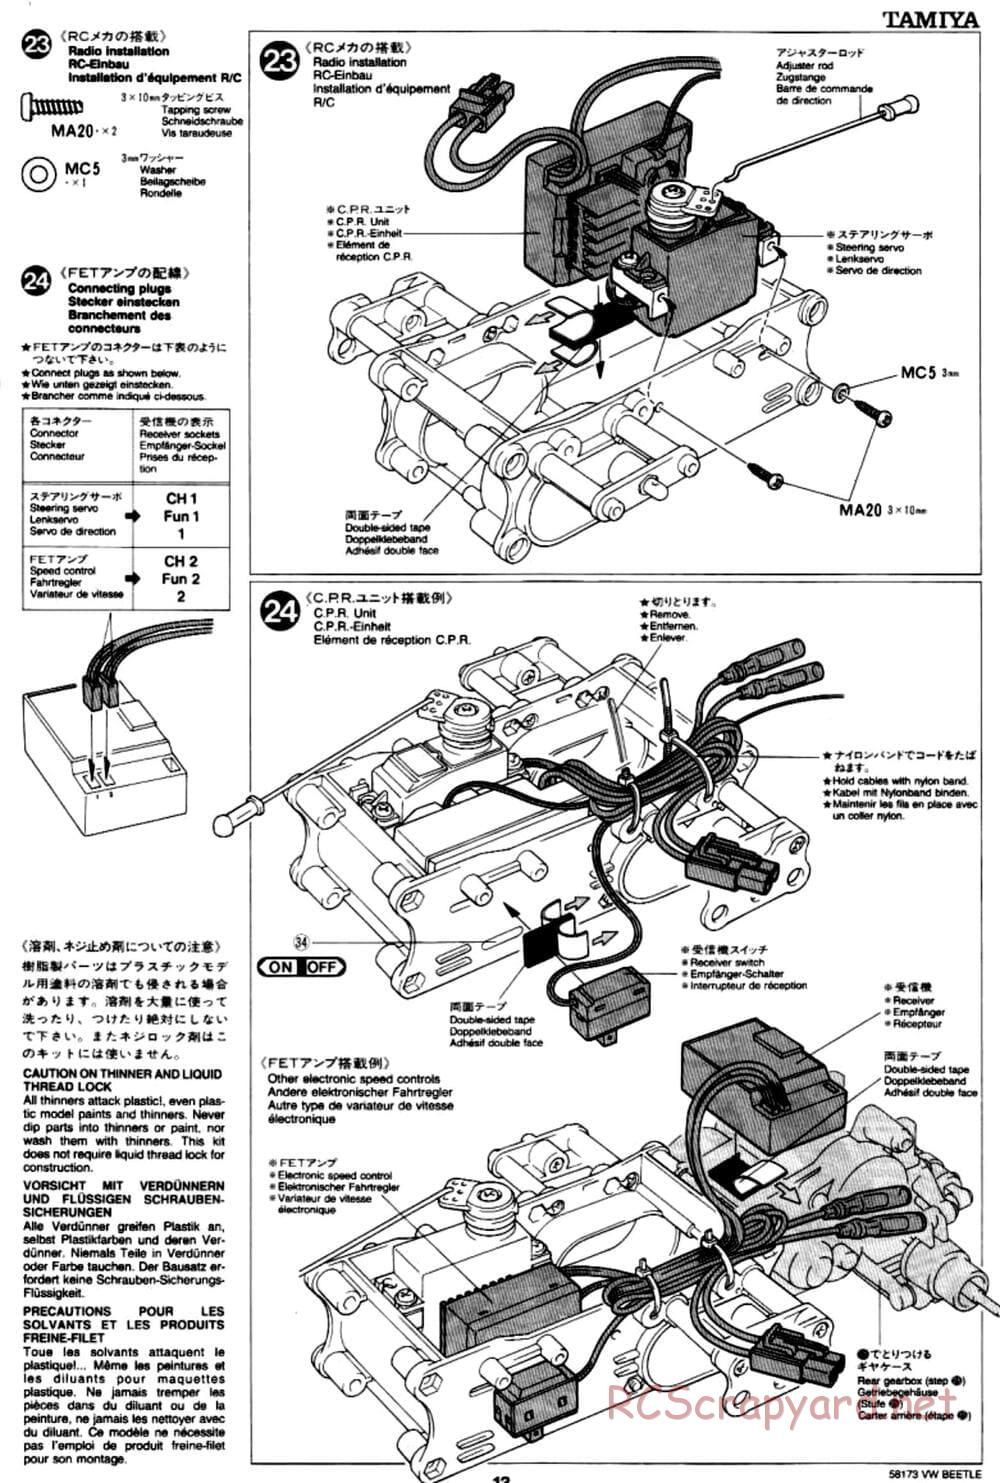 Tamiya - Volkswagen Beetle - M02L Chassis - Manual - Page 13